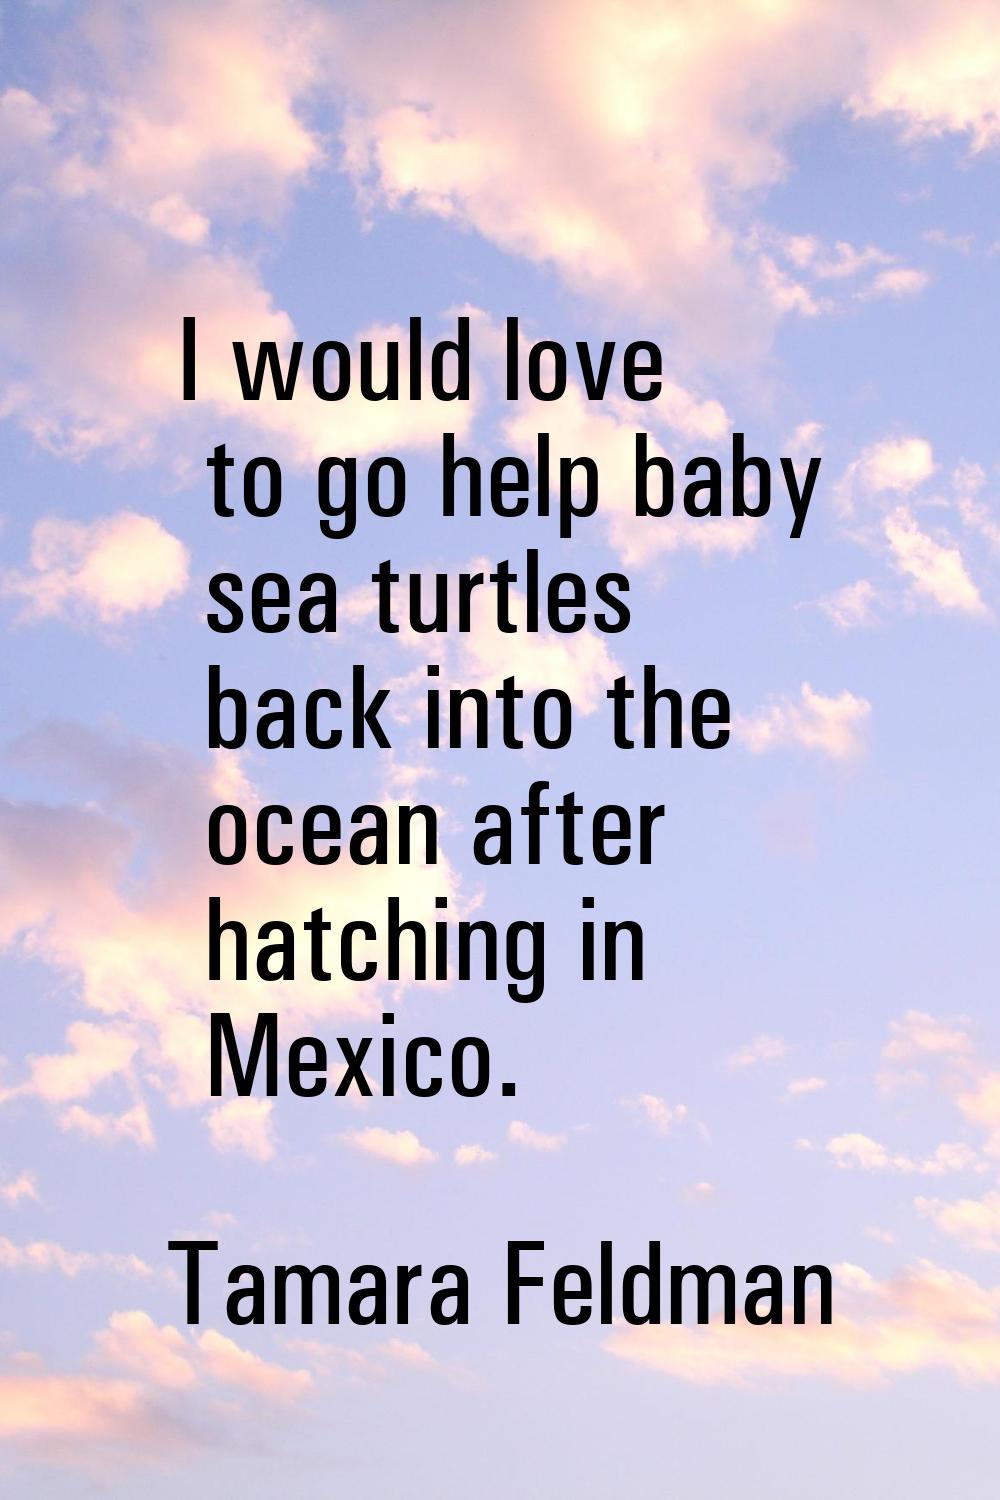 I would love to go help baby sea turtles back into the ocean after hatching in Mexico.